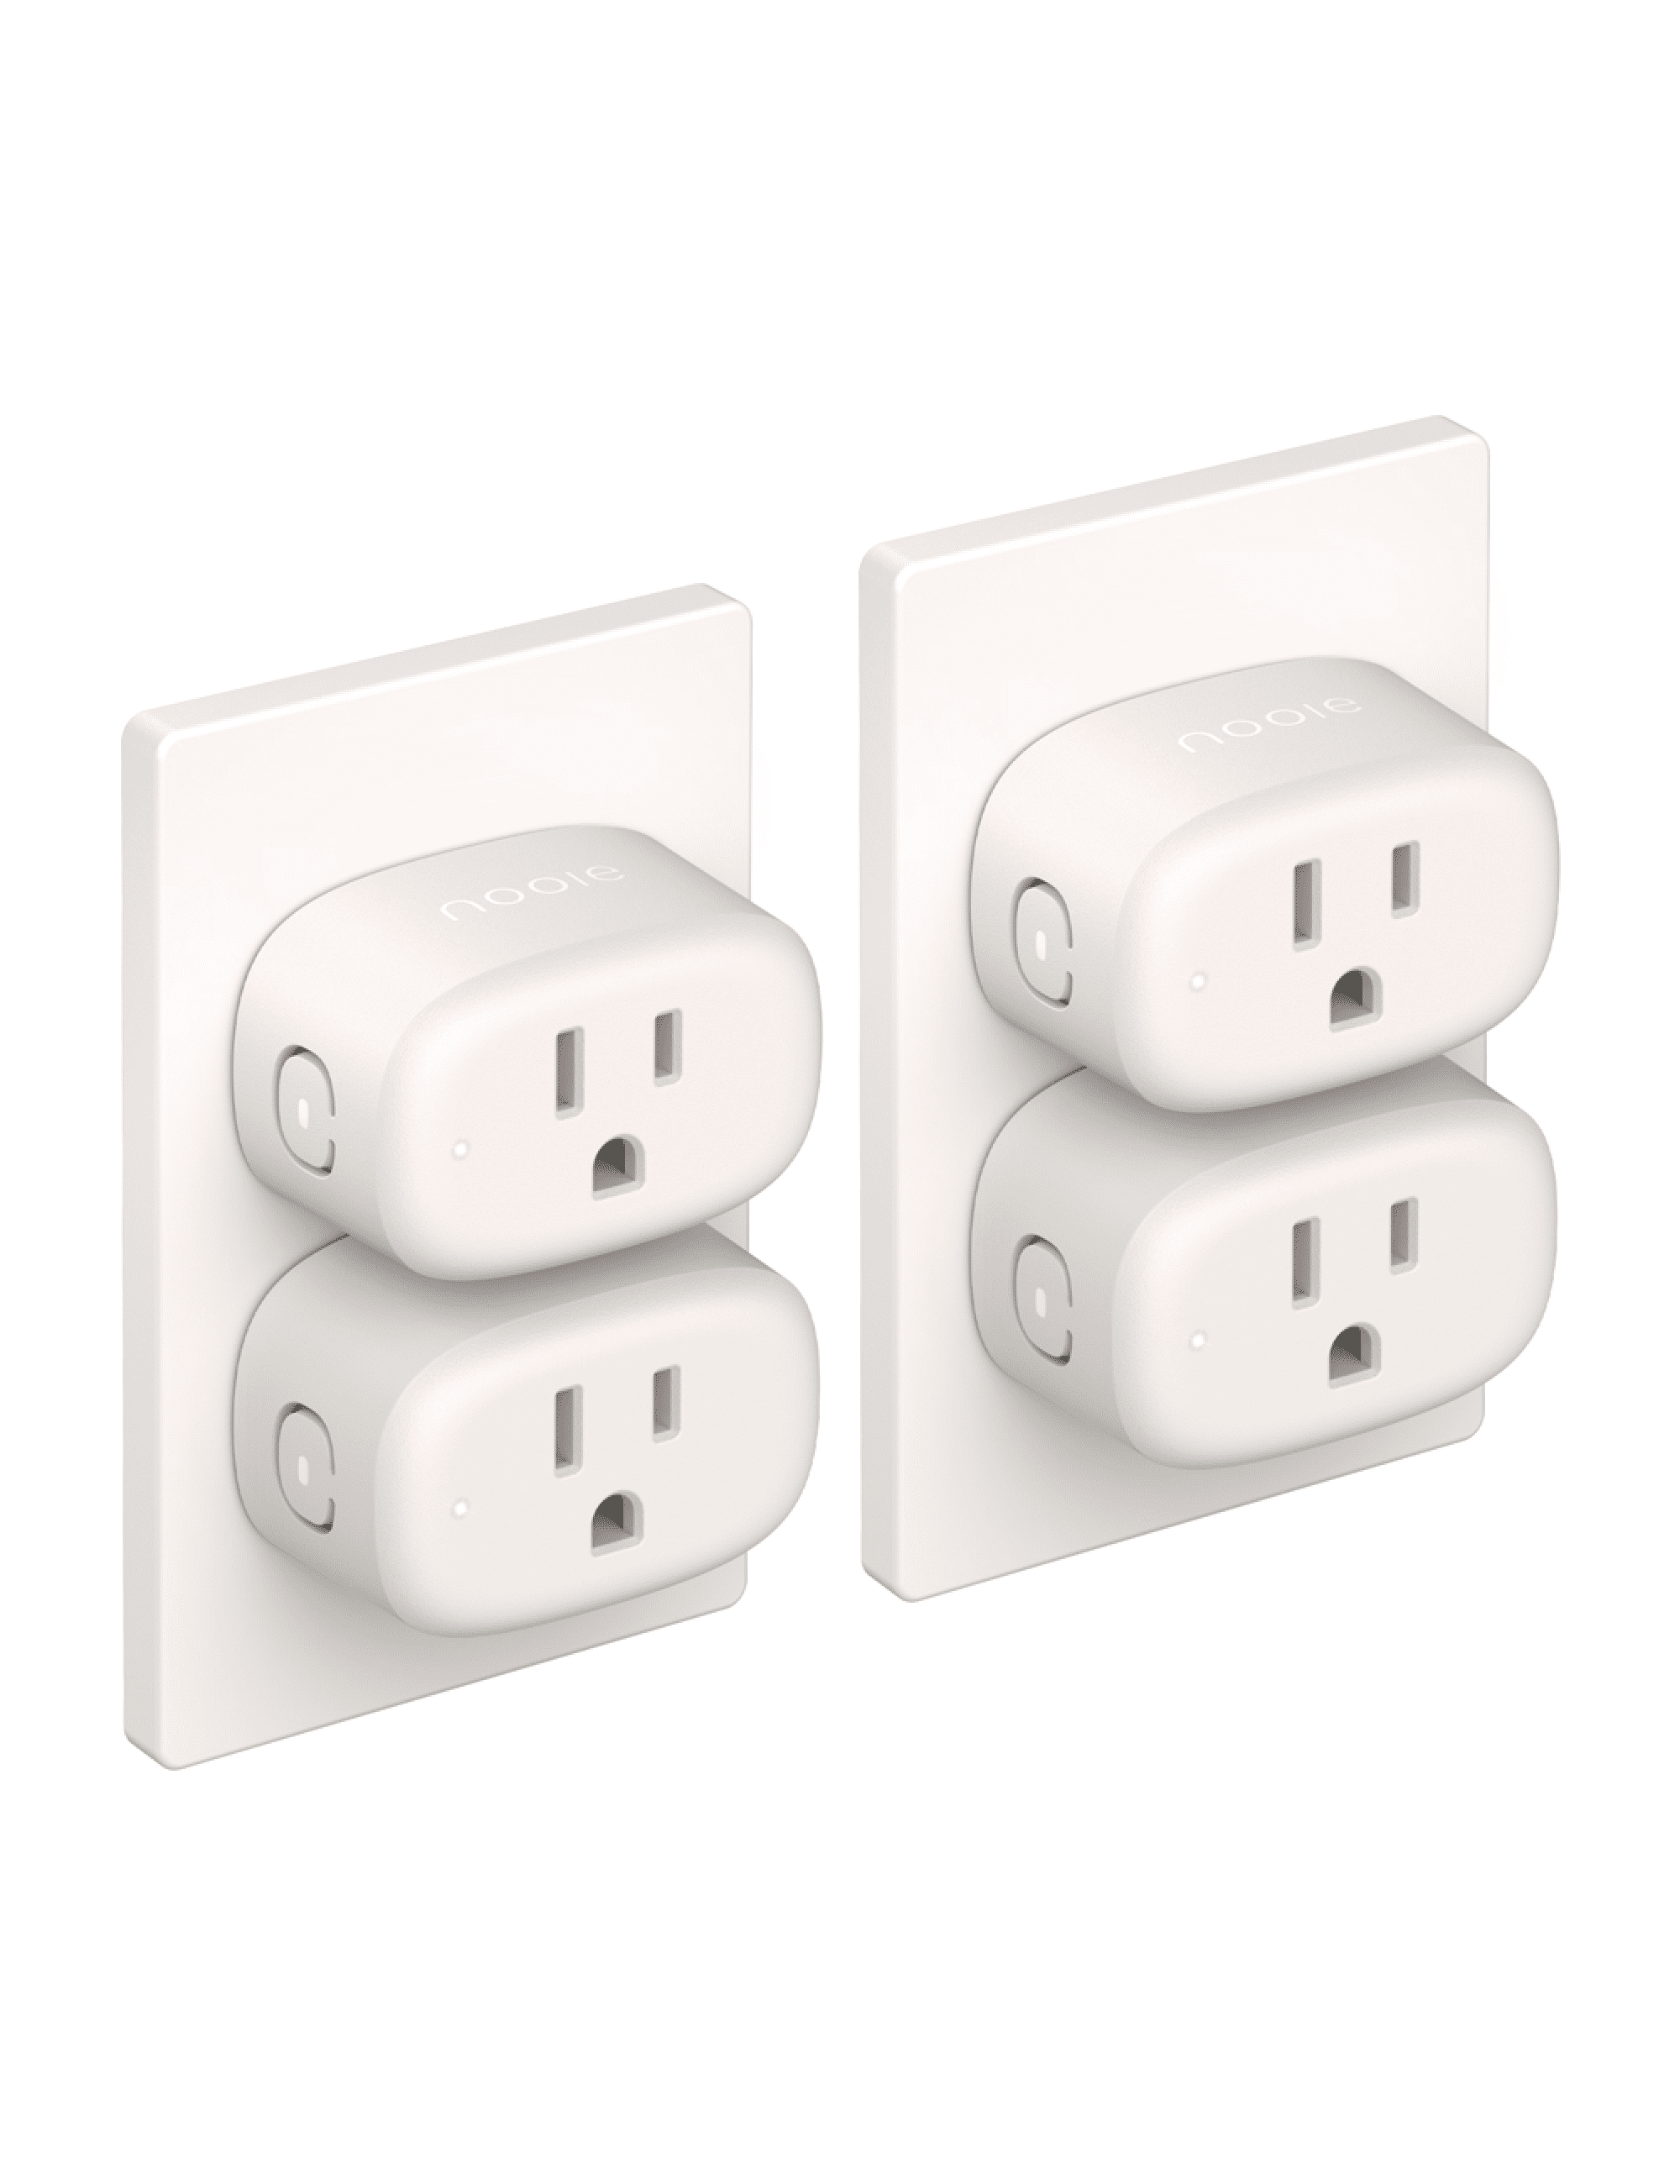 Vont Smart Plug [2 Pack] Alexa Smart Plugs, WiFi + Bluetooth, Google  Assistant & IFTTT, Voice Command, Timer & Schedules, Control Anywhere,  Vacation M for Sale in Santa Ana, CA - OfferUp